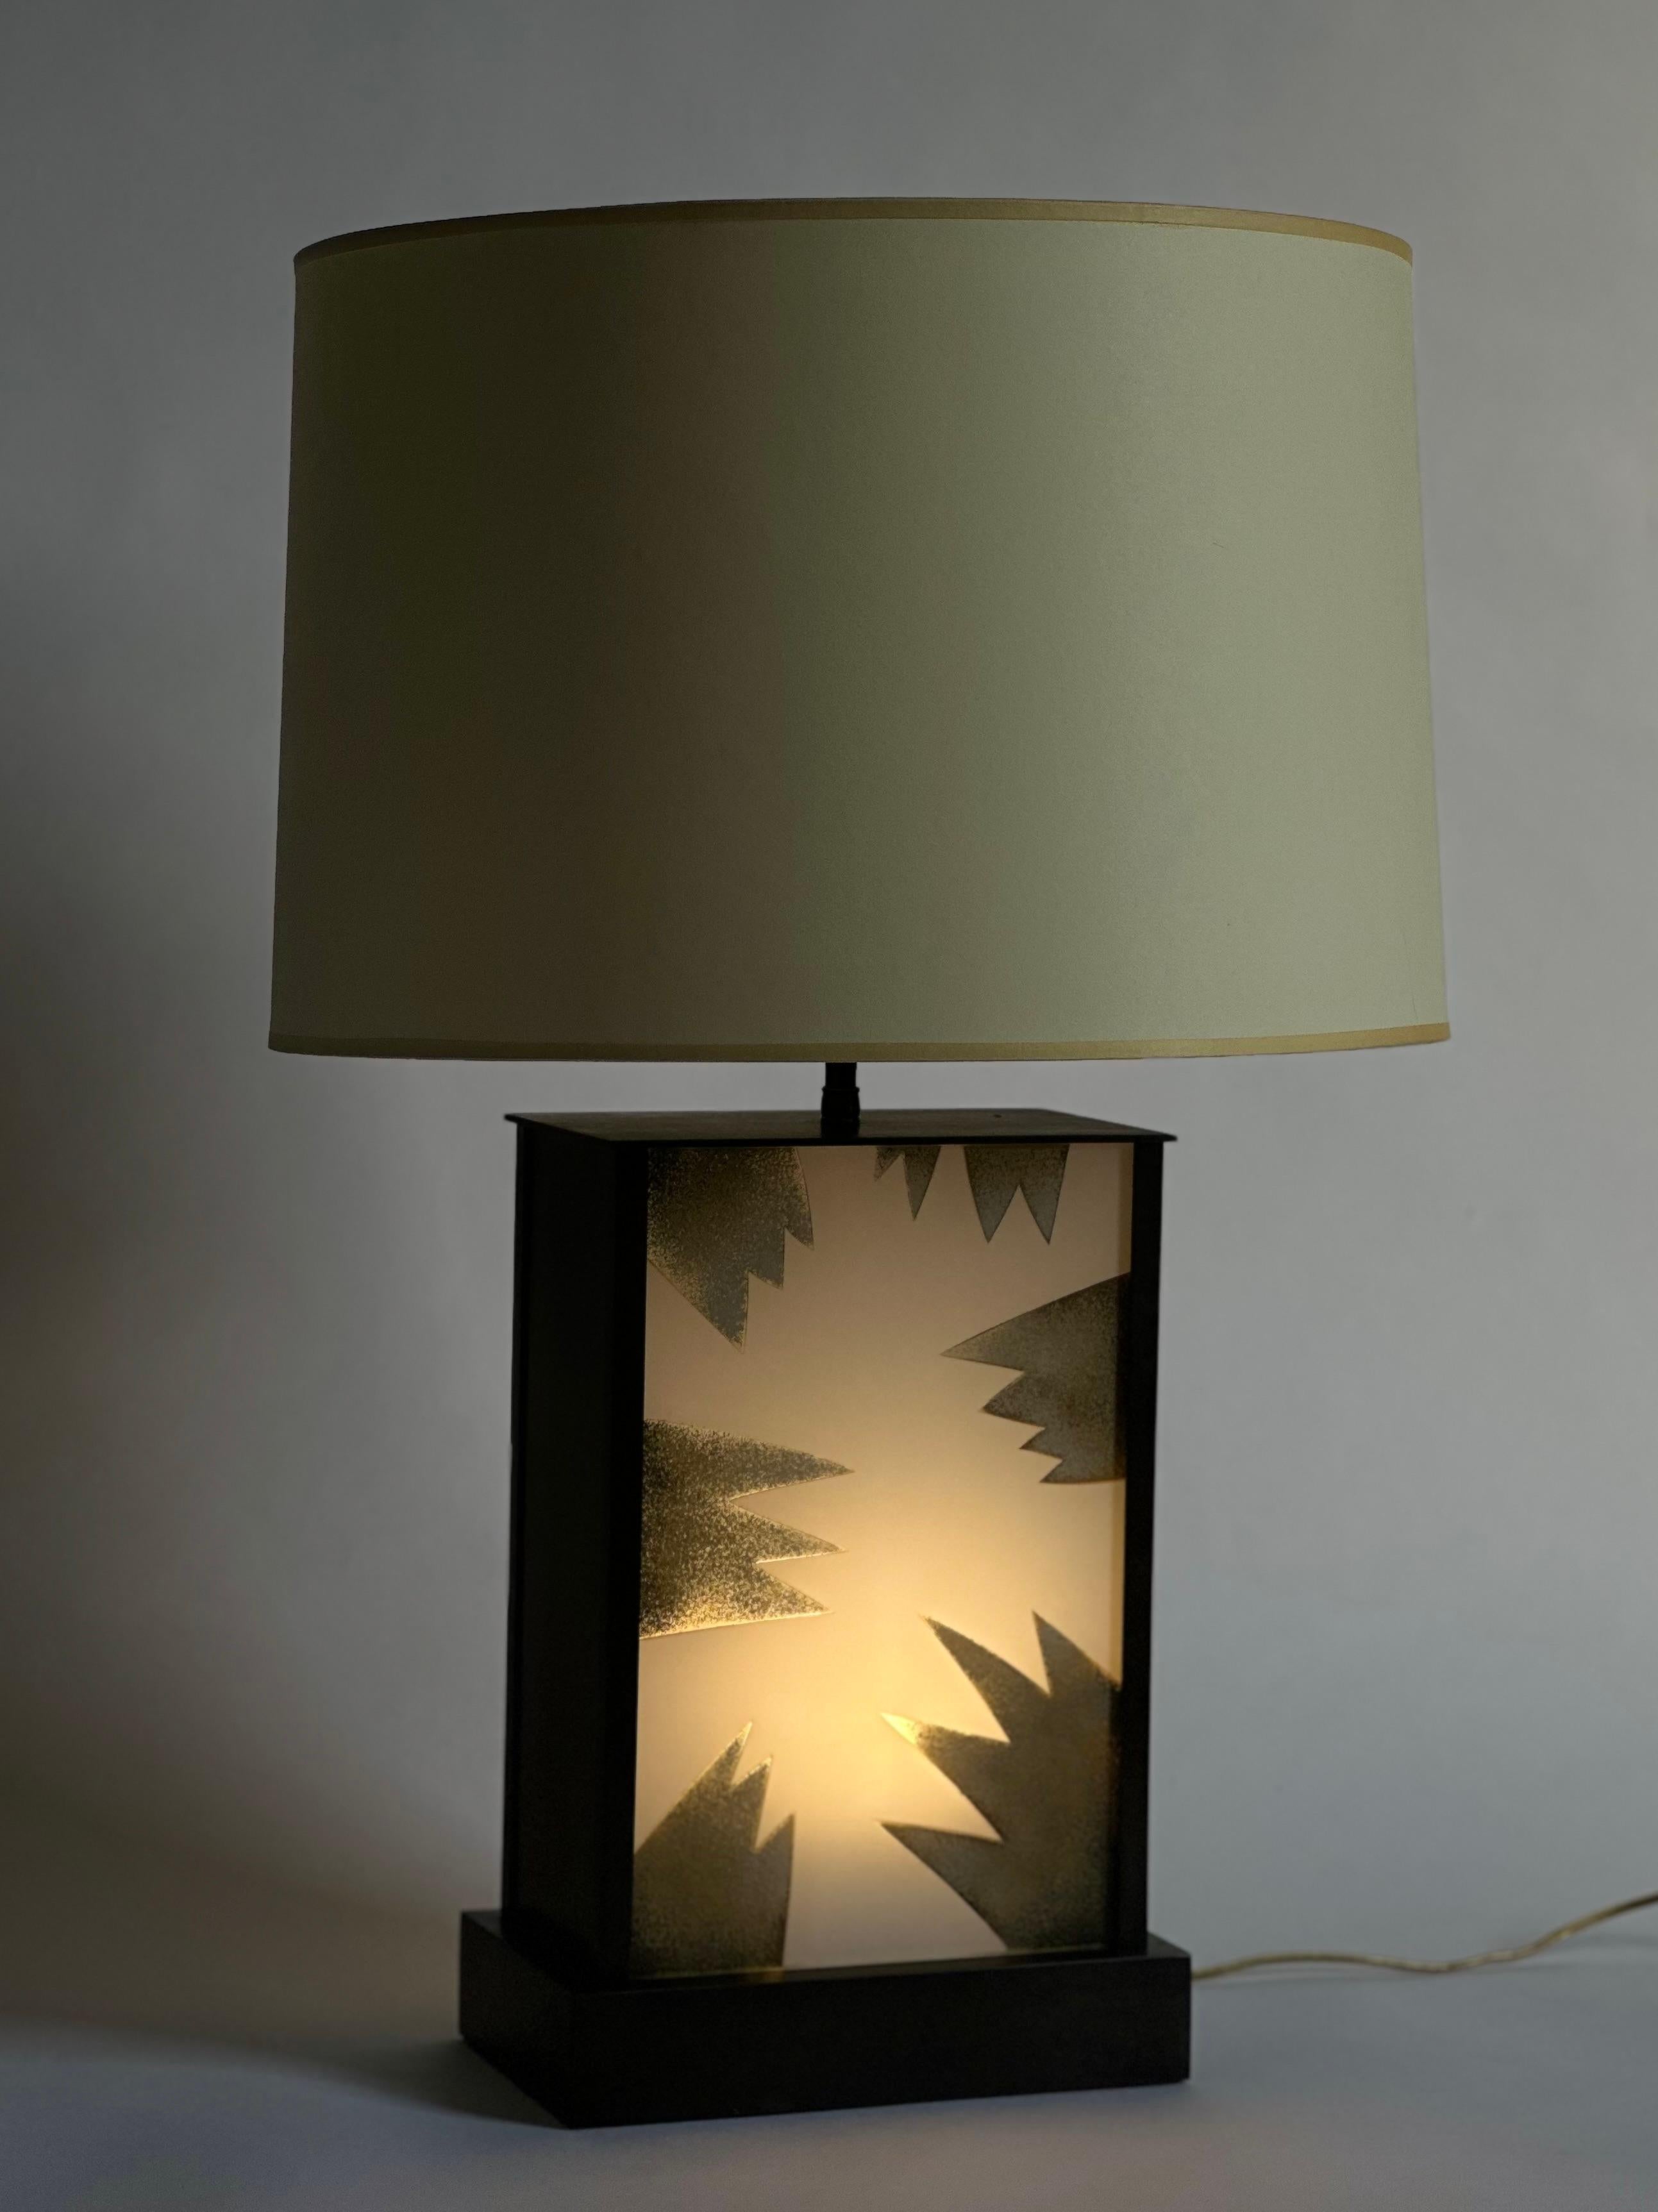 An unusual modern table lamp comprising a bronze or bronzed metal rectangular base that illuminates two reverse etched and painted glass panels (design motif is the same on both sides). The base can be lit independently from or along with the 2 main